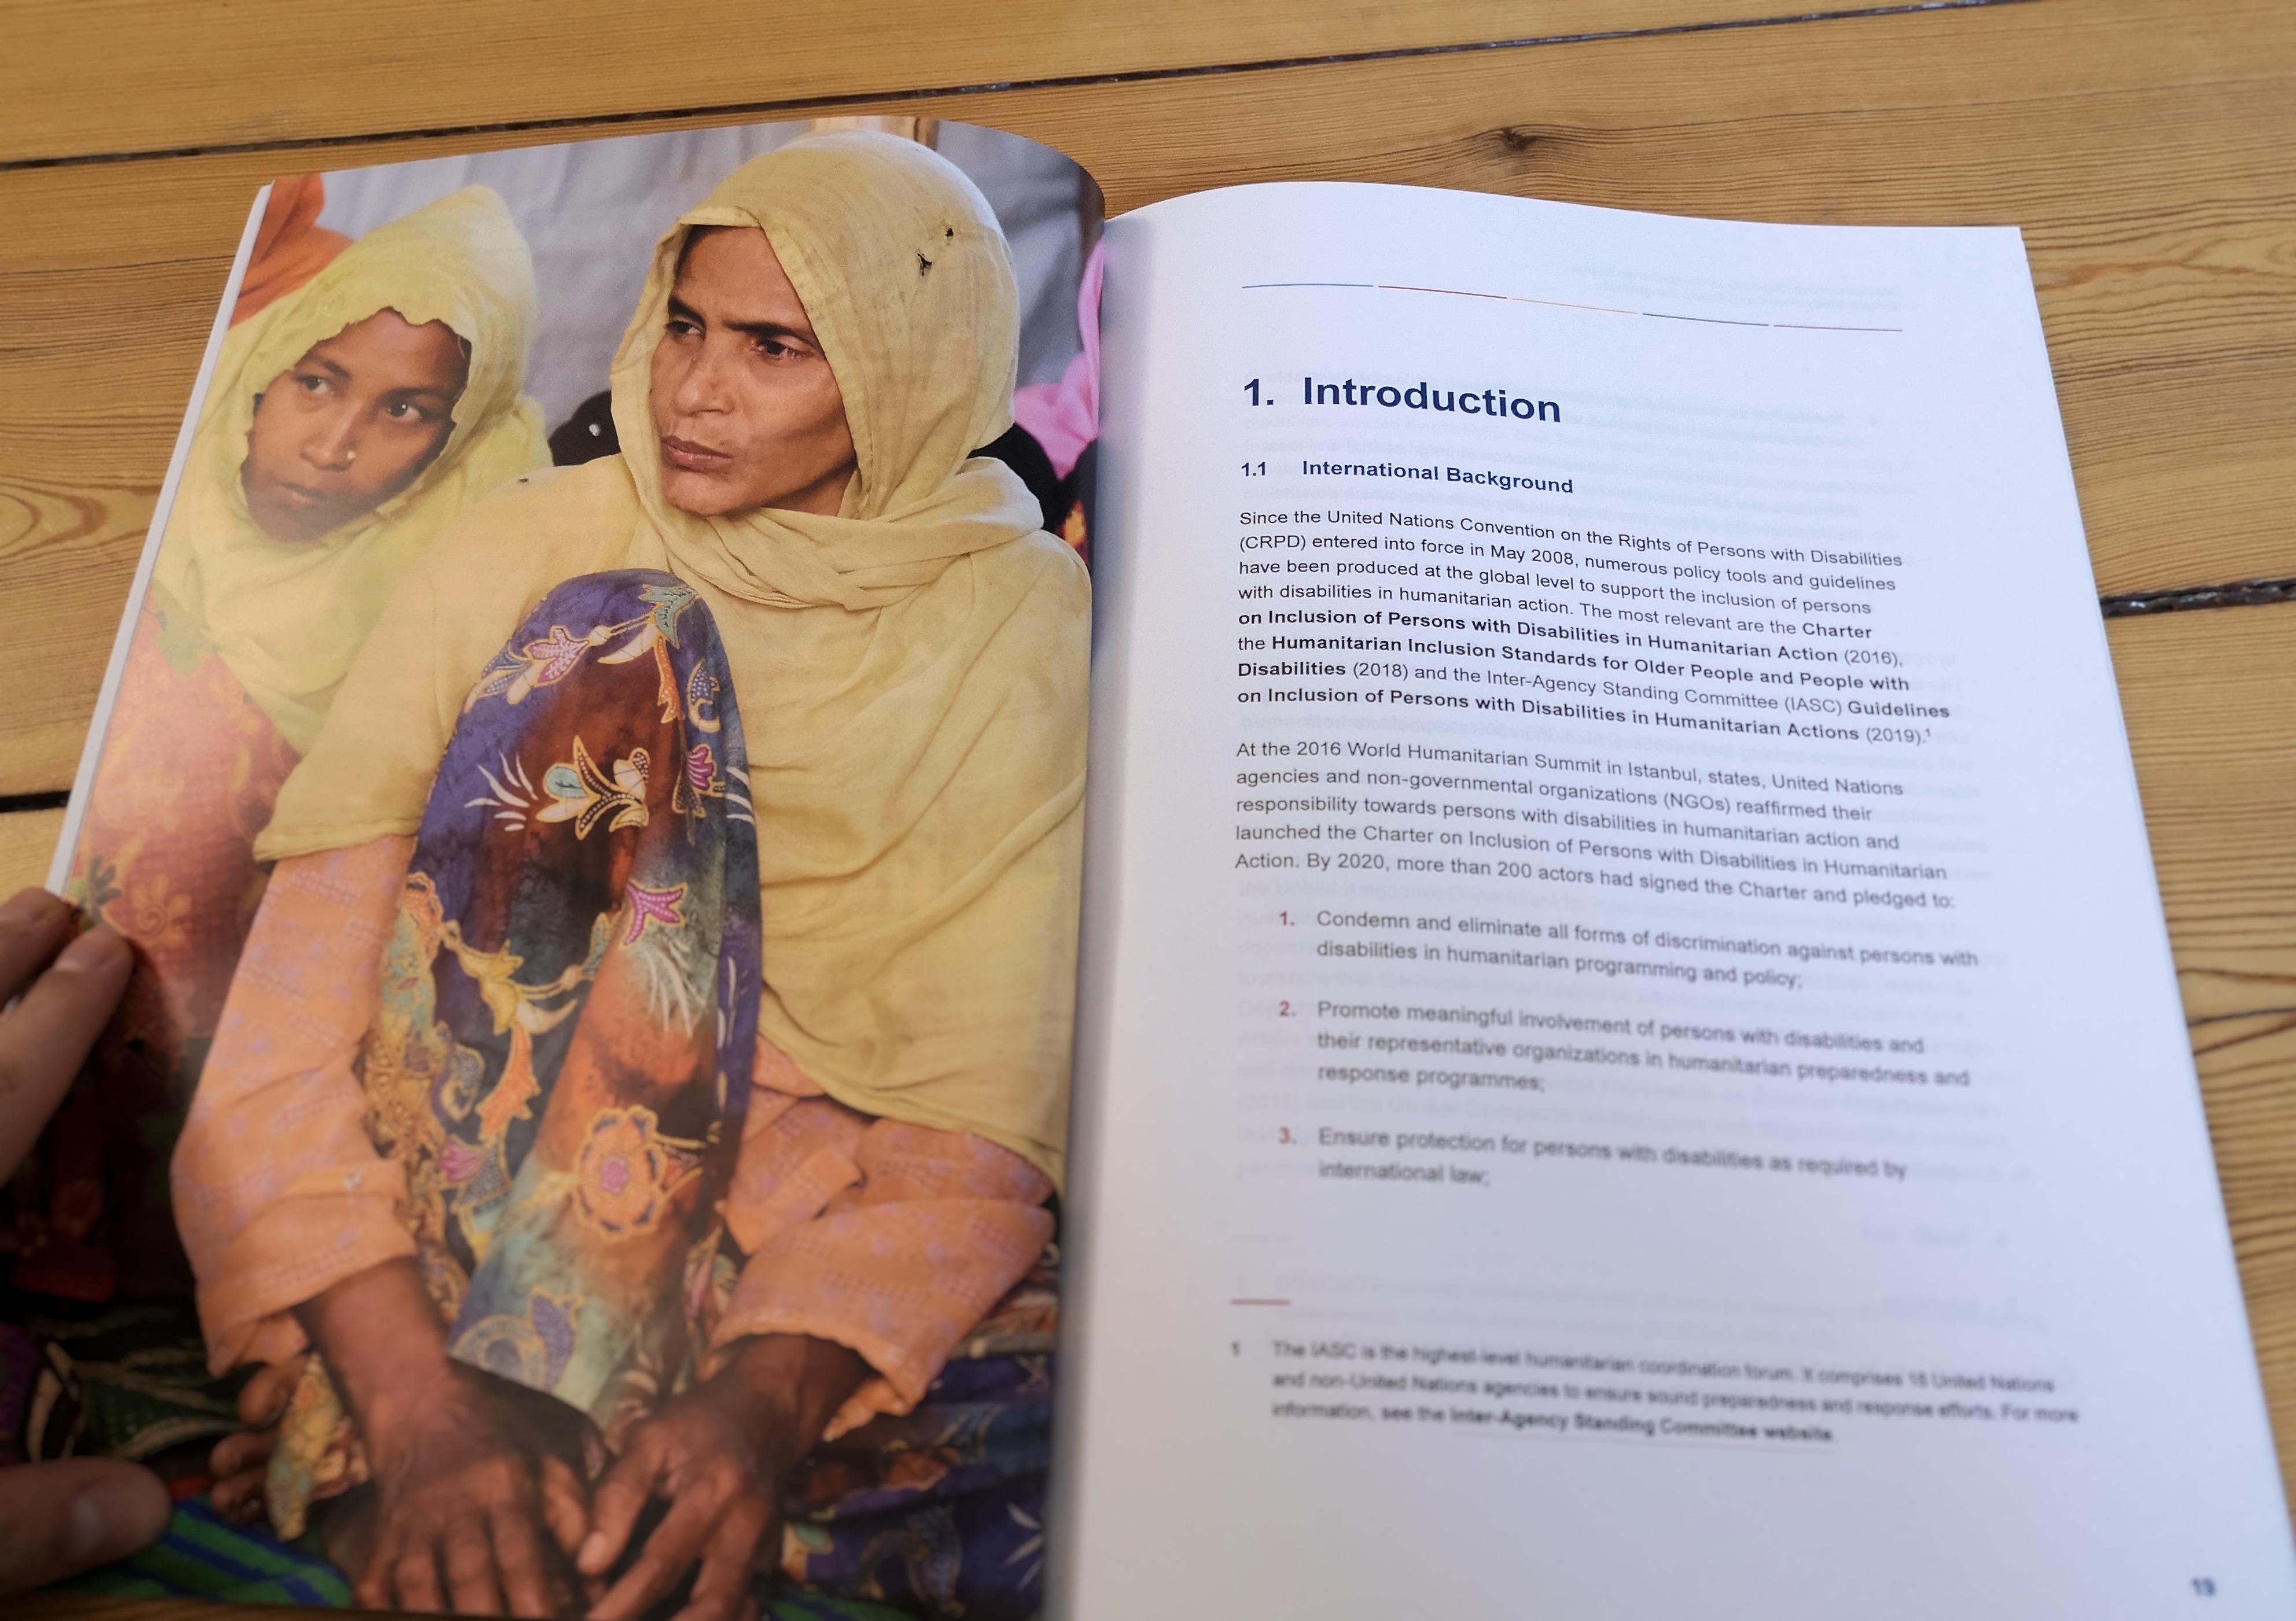 The photo shows the introductory chapter of the research report on inclusive humanitarian action in Bangladesh.